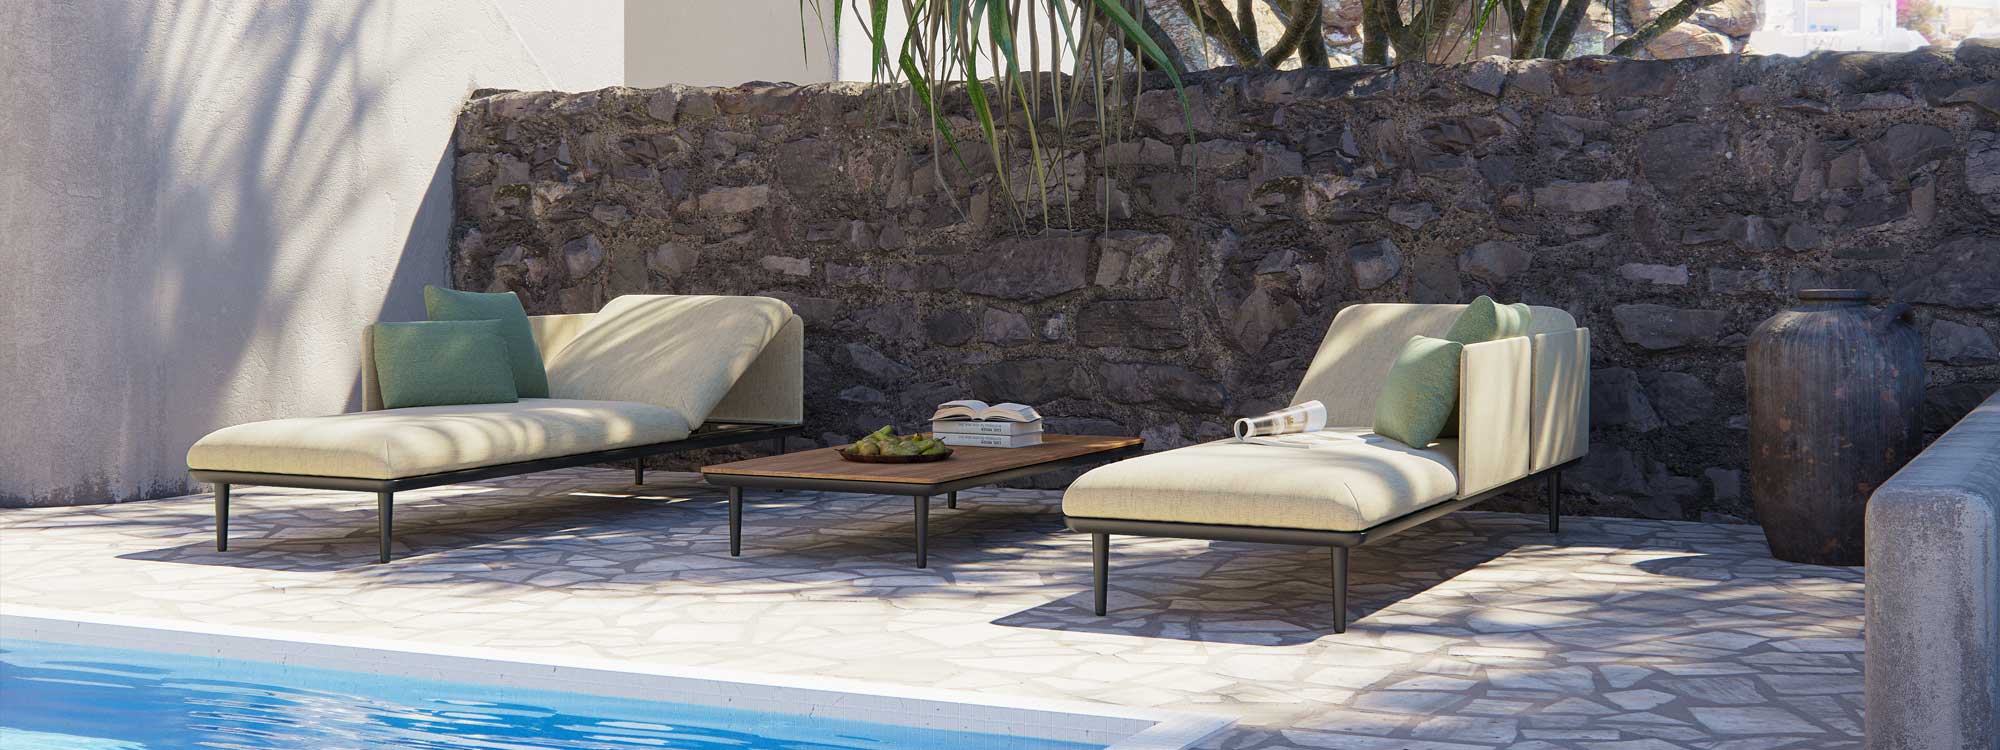 Royal Botania Styletto daybeds in dappled shade on poolside